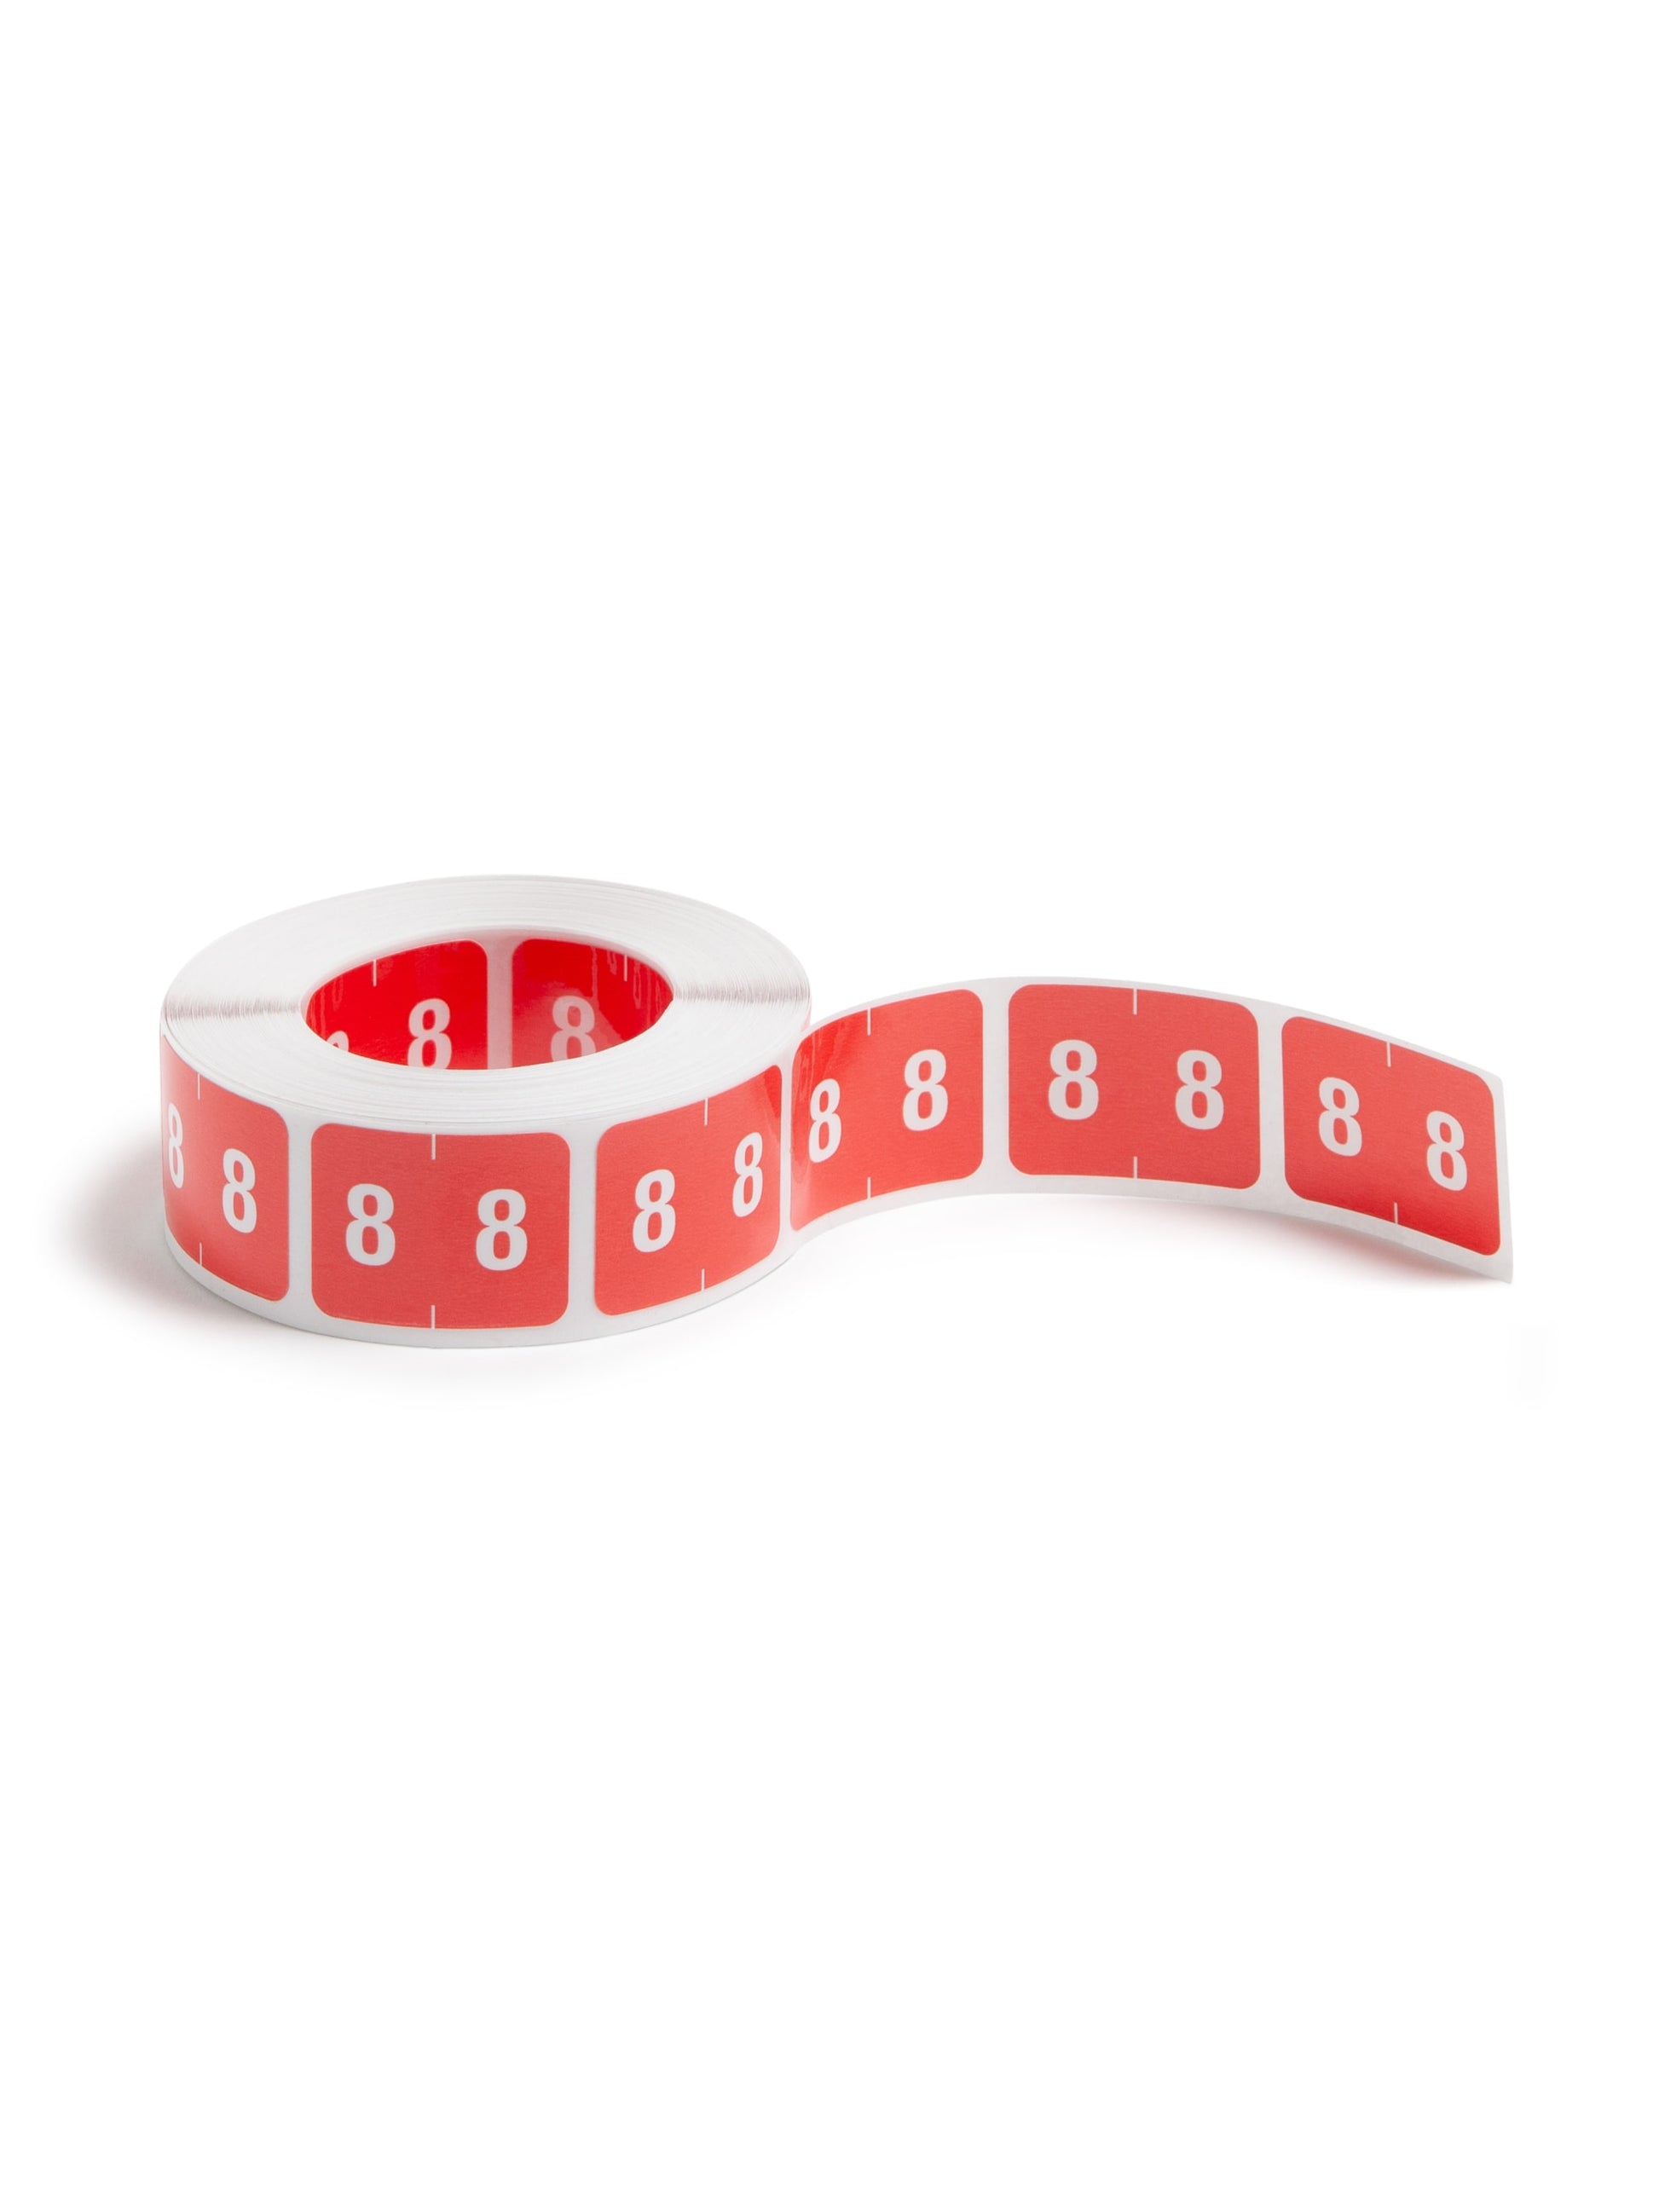 DCCRN Color-Coded Numeric Labels - Rolls, Red Color, 1-1/4" X 1" Size, Set of 1, 086486673488